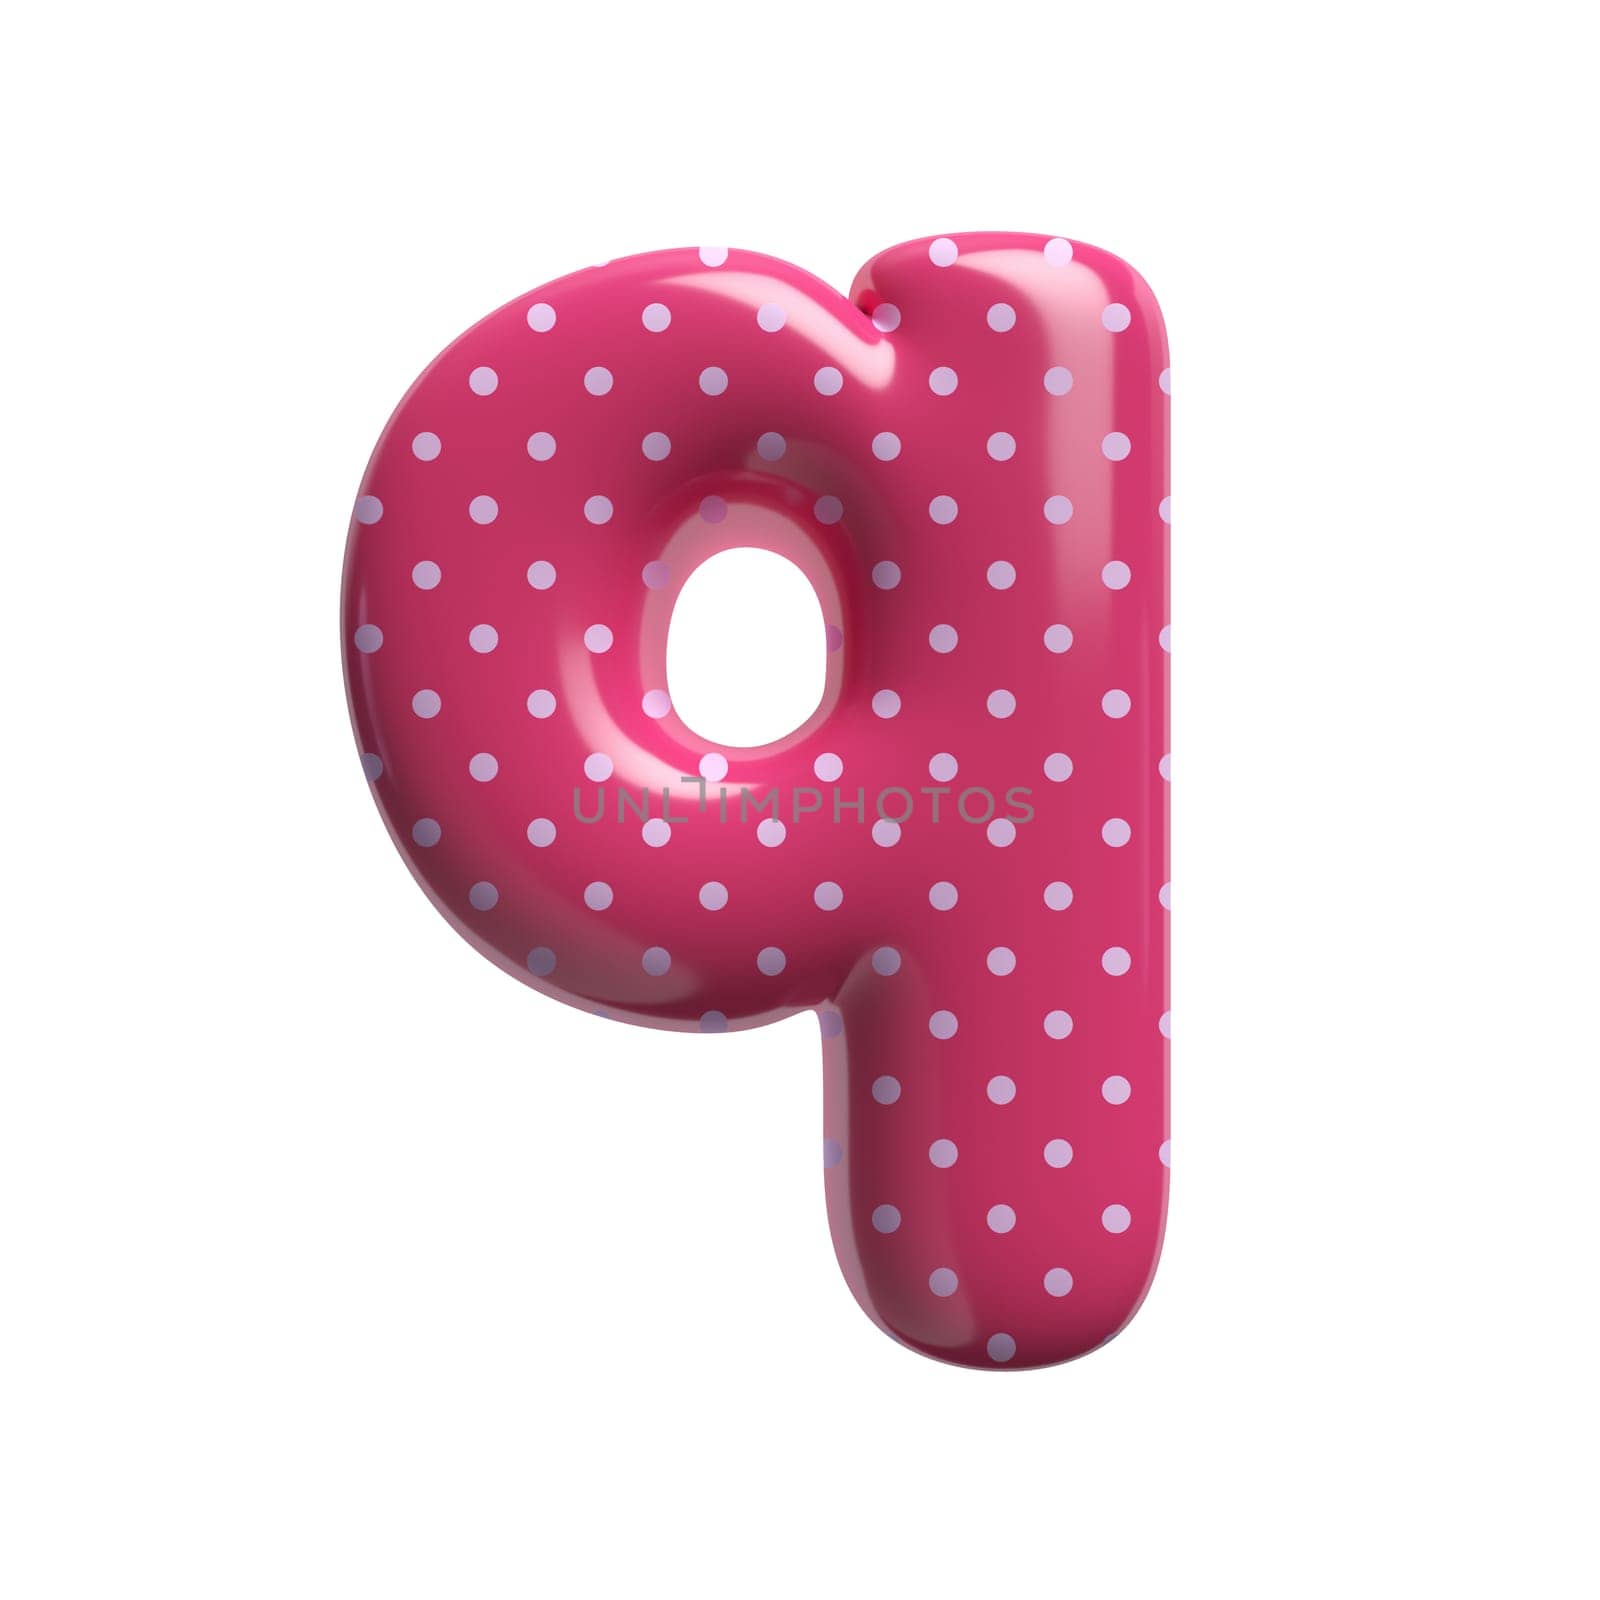 Polka dot letter Q - Lower-case 3d pink retro font - Suitable for Fashion, retro design or decoration related subjects by chrisroll